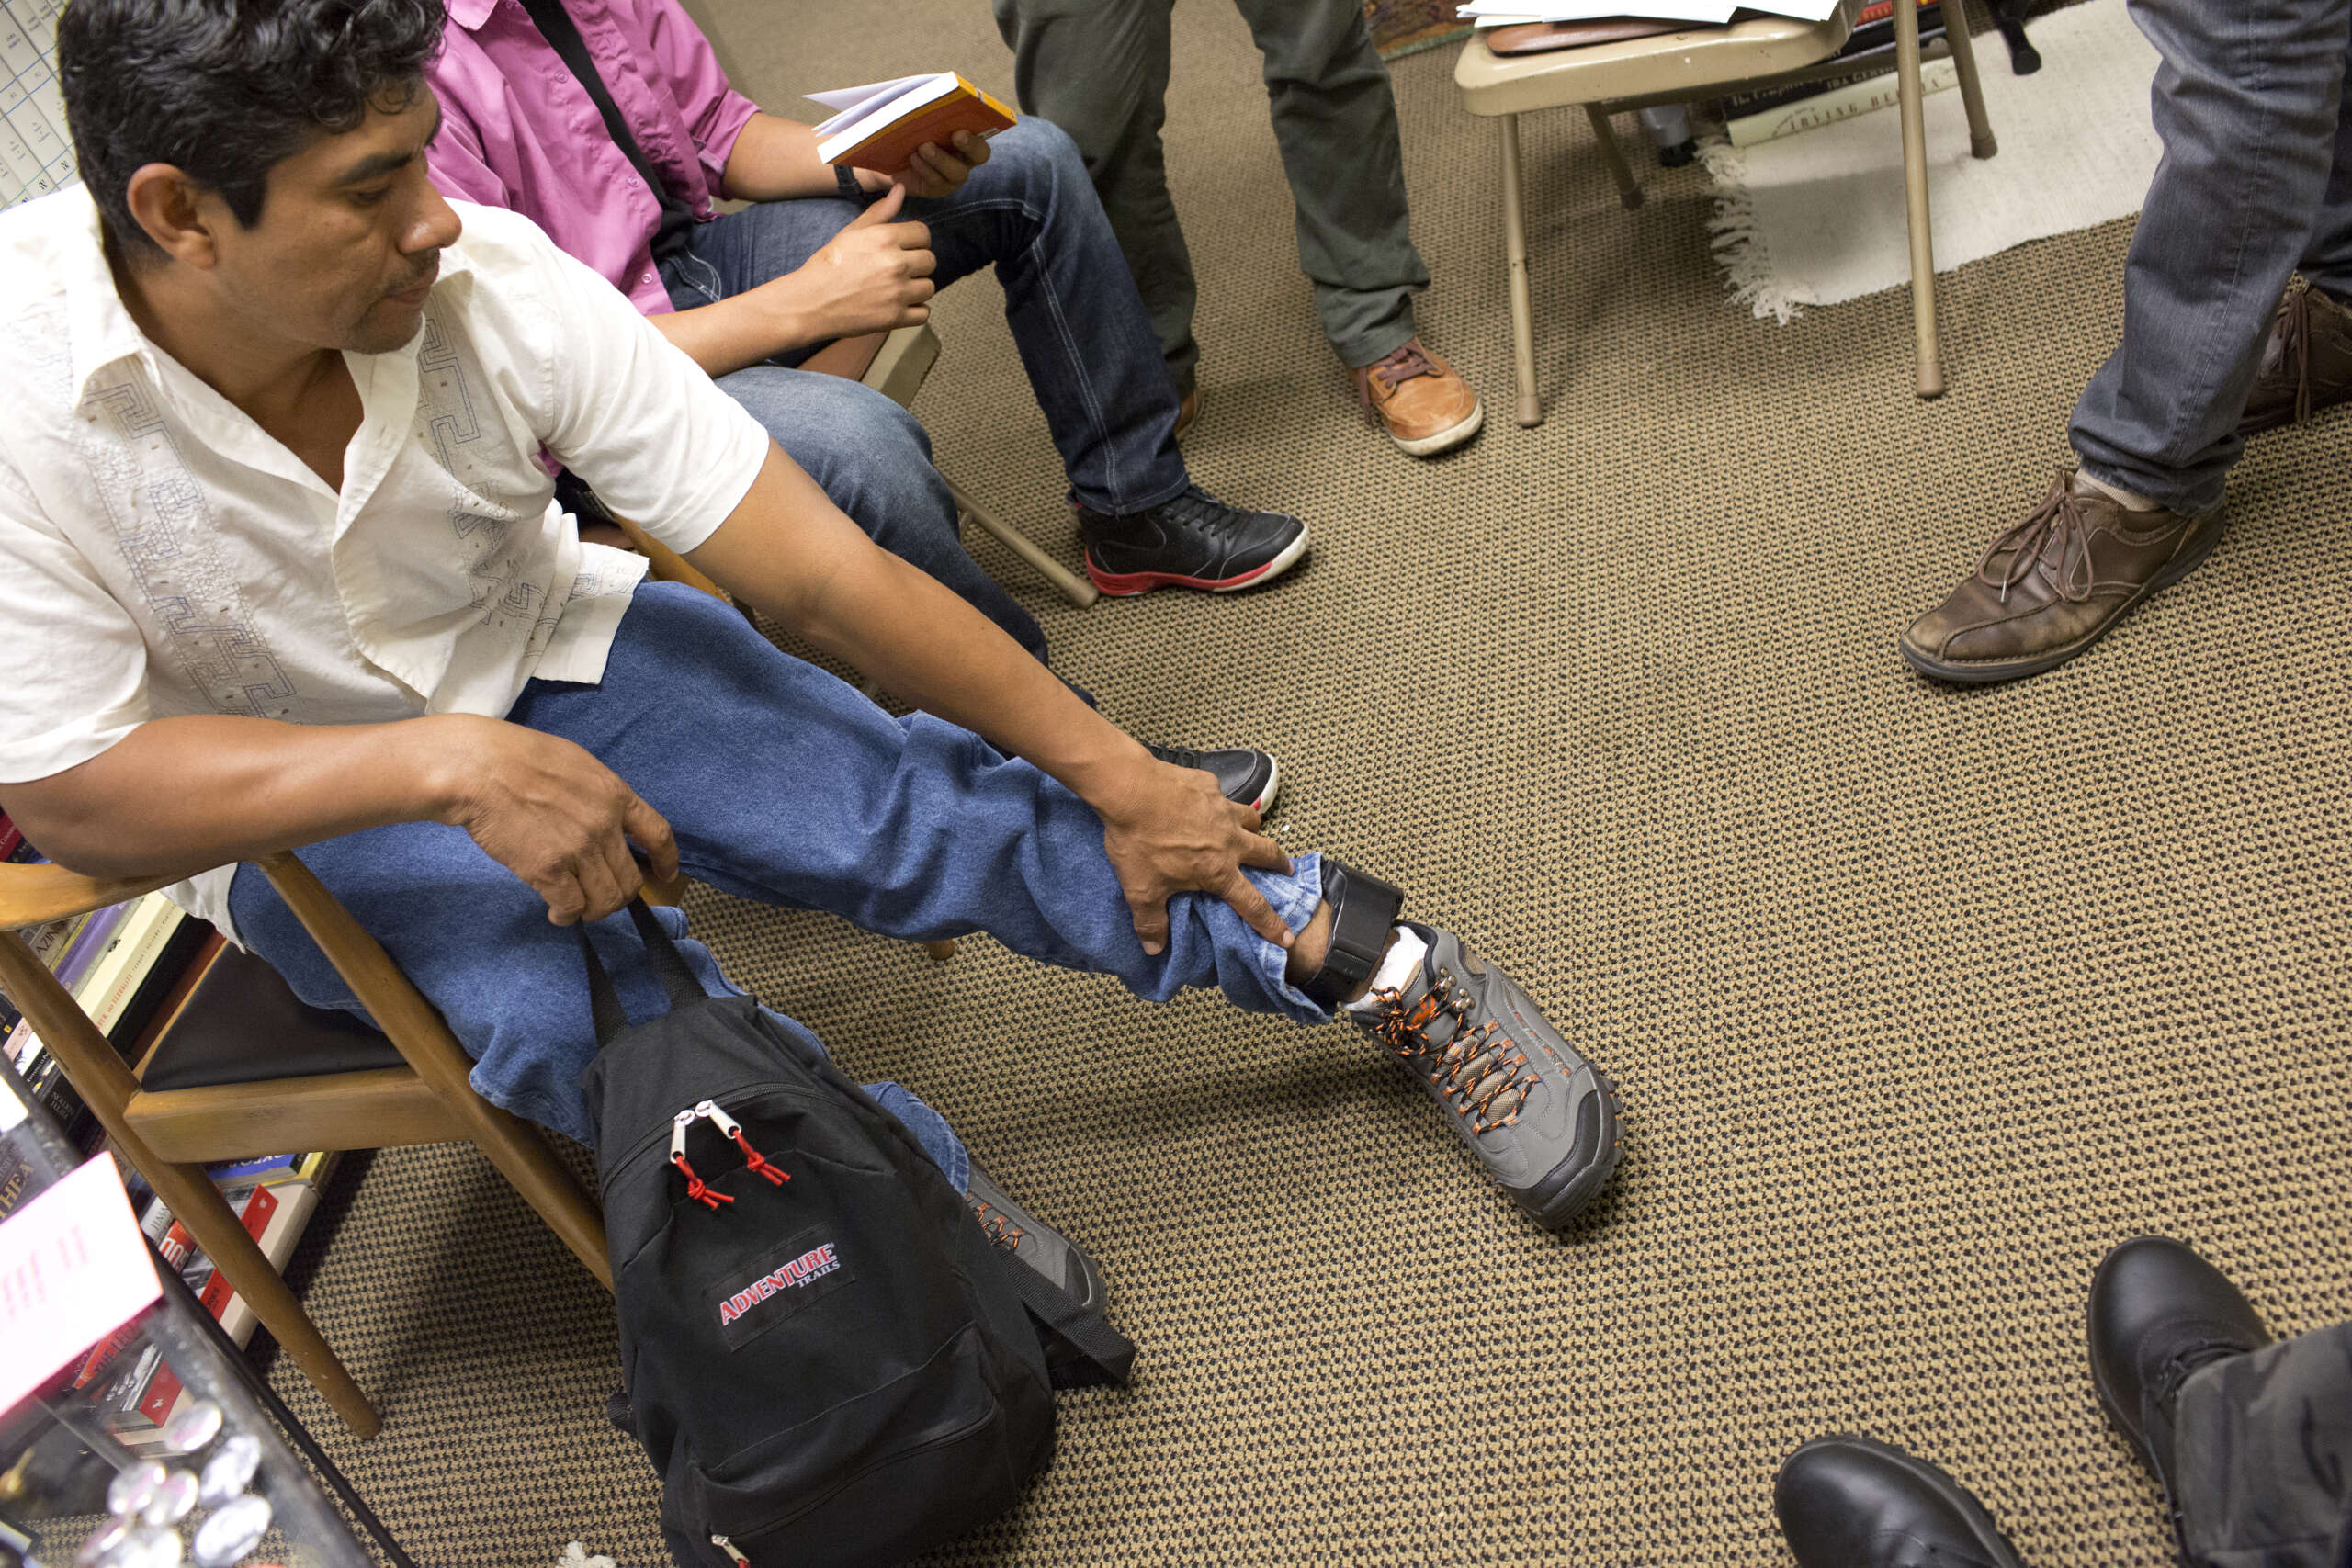 Courtroom showdown: Is Richland County's ankle monitoring legal? | The State